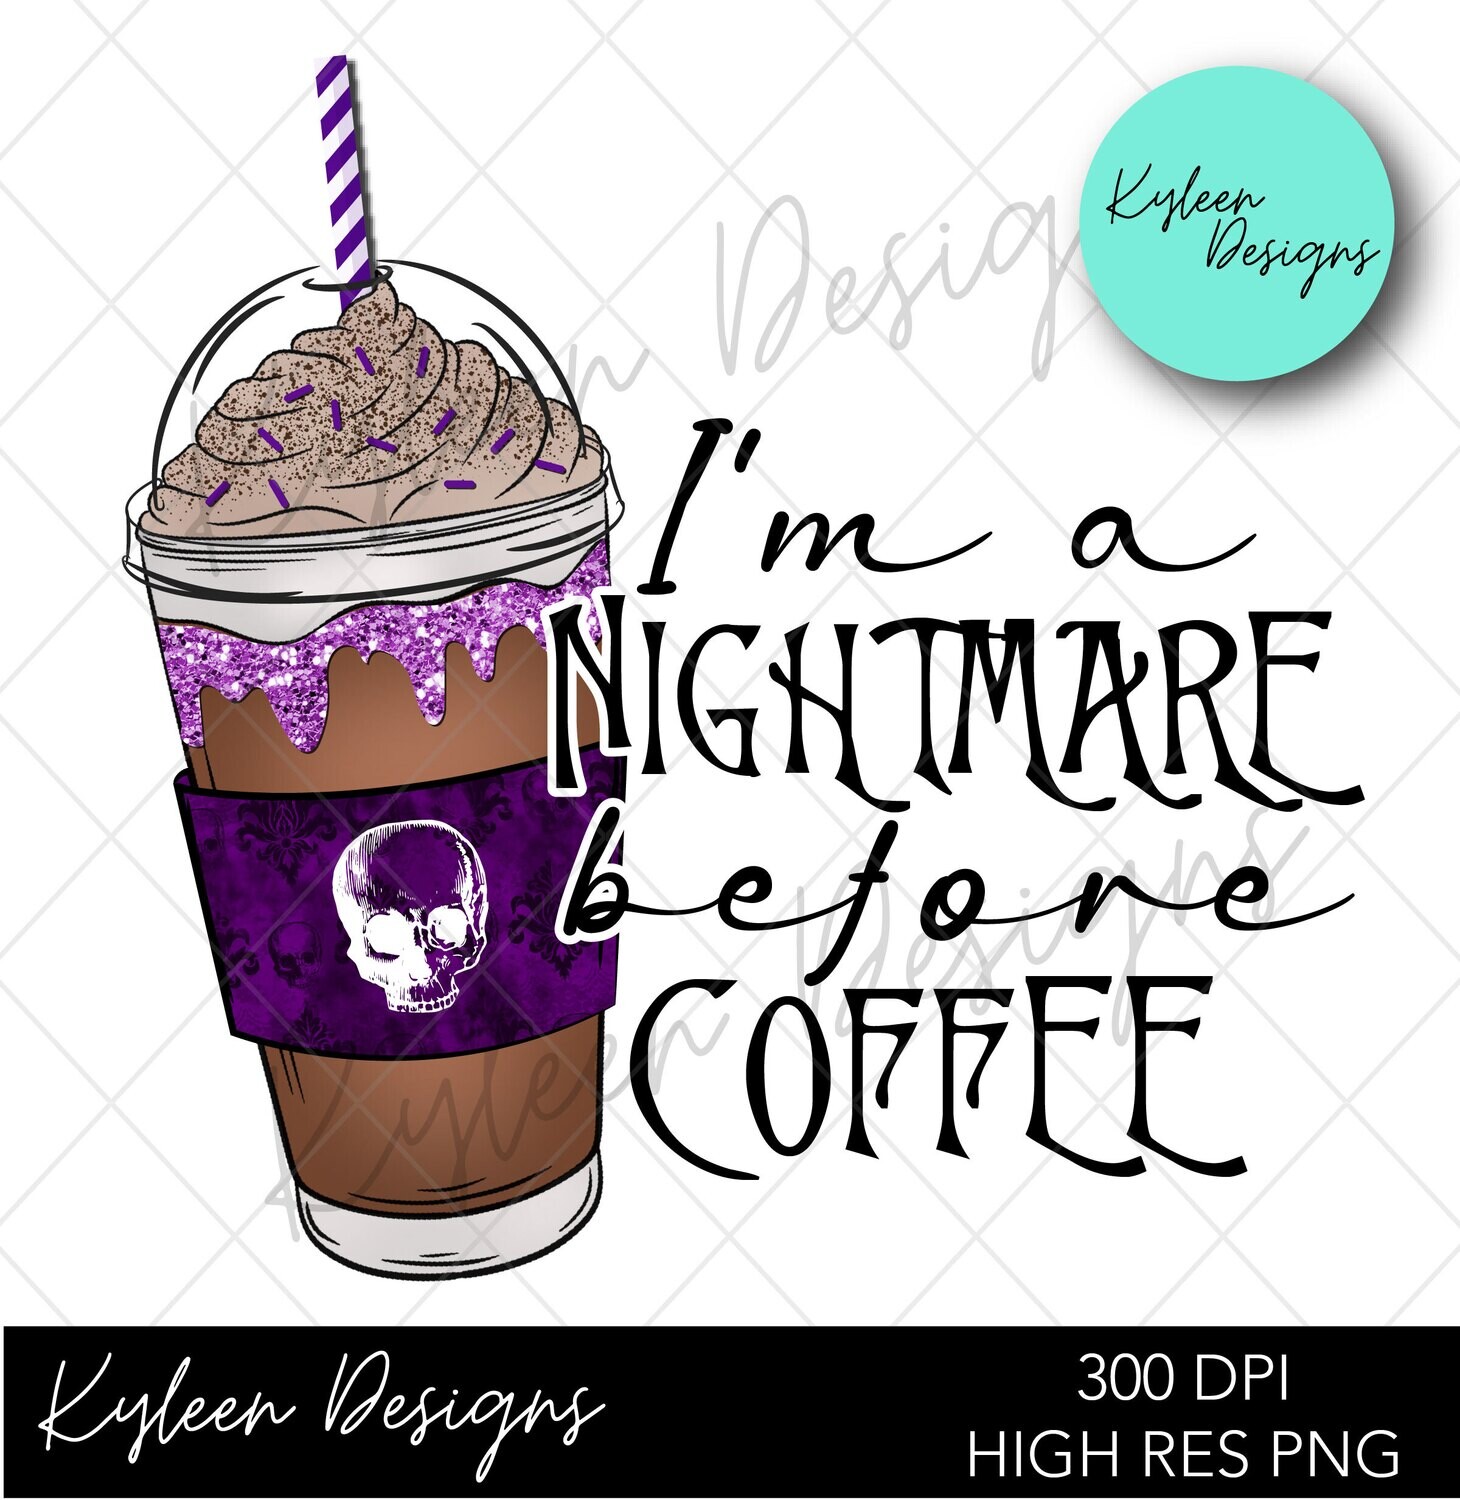 I'm a nightmare before coffee high res PNG